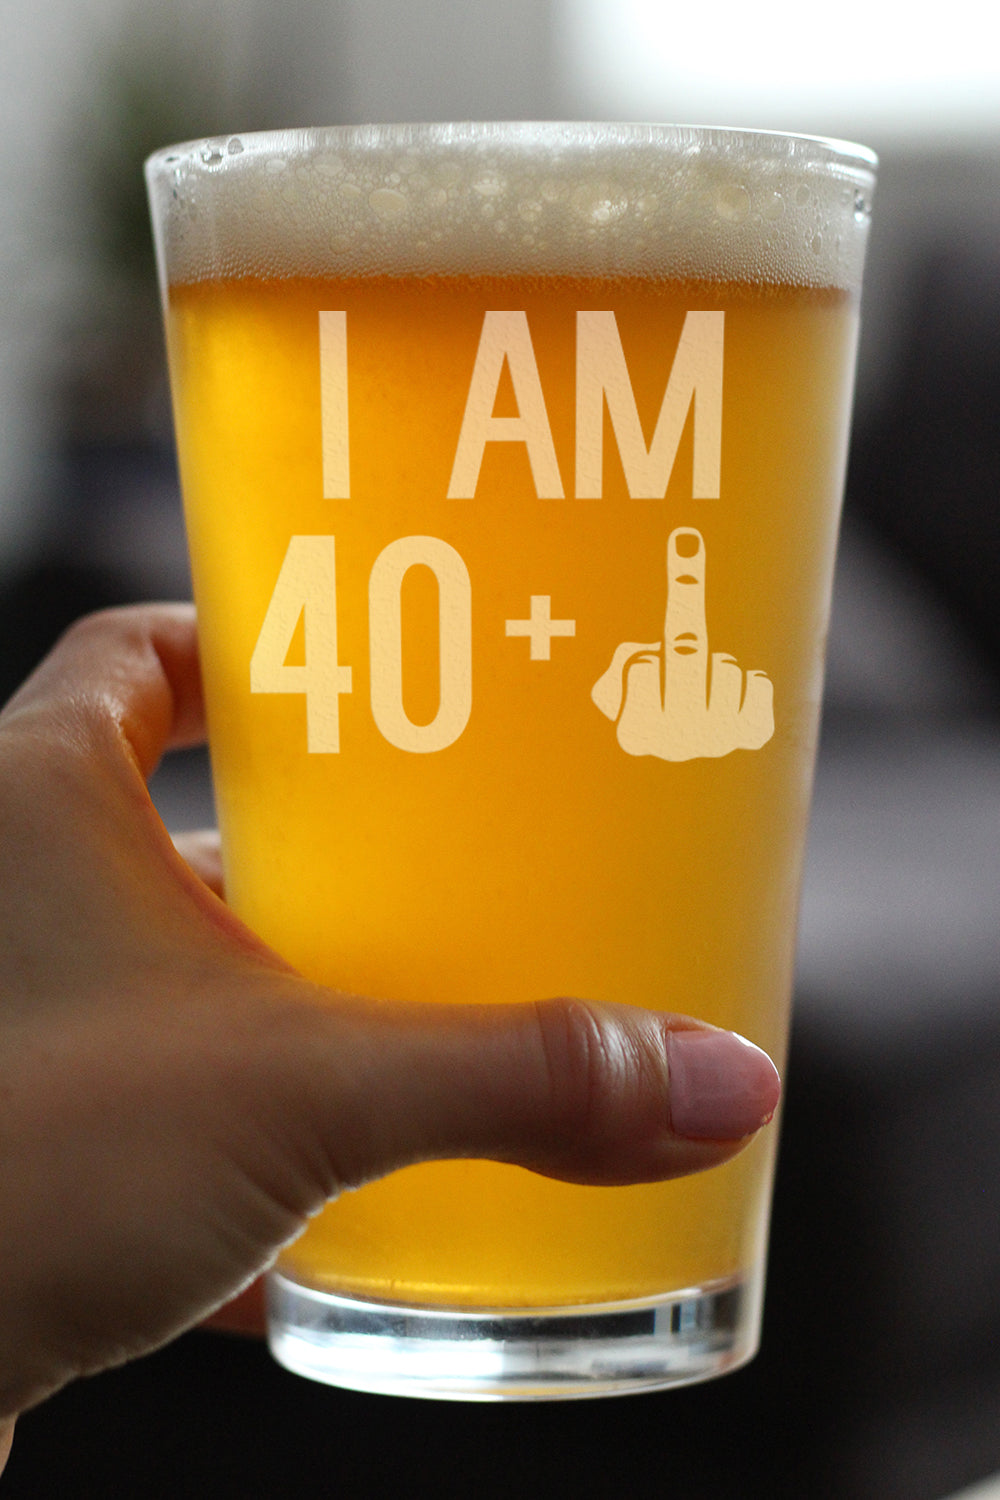 40 + 1 Middle Finger - 16 oz Pint Glass for Beer - Funny 41st Birthday Gifts for Men and Women Turning 41